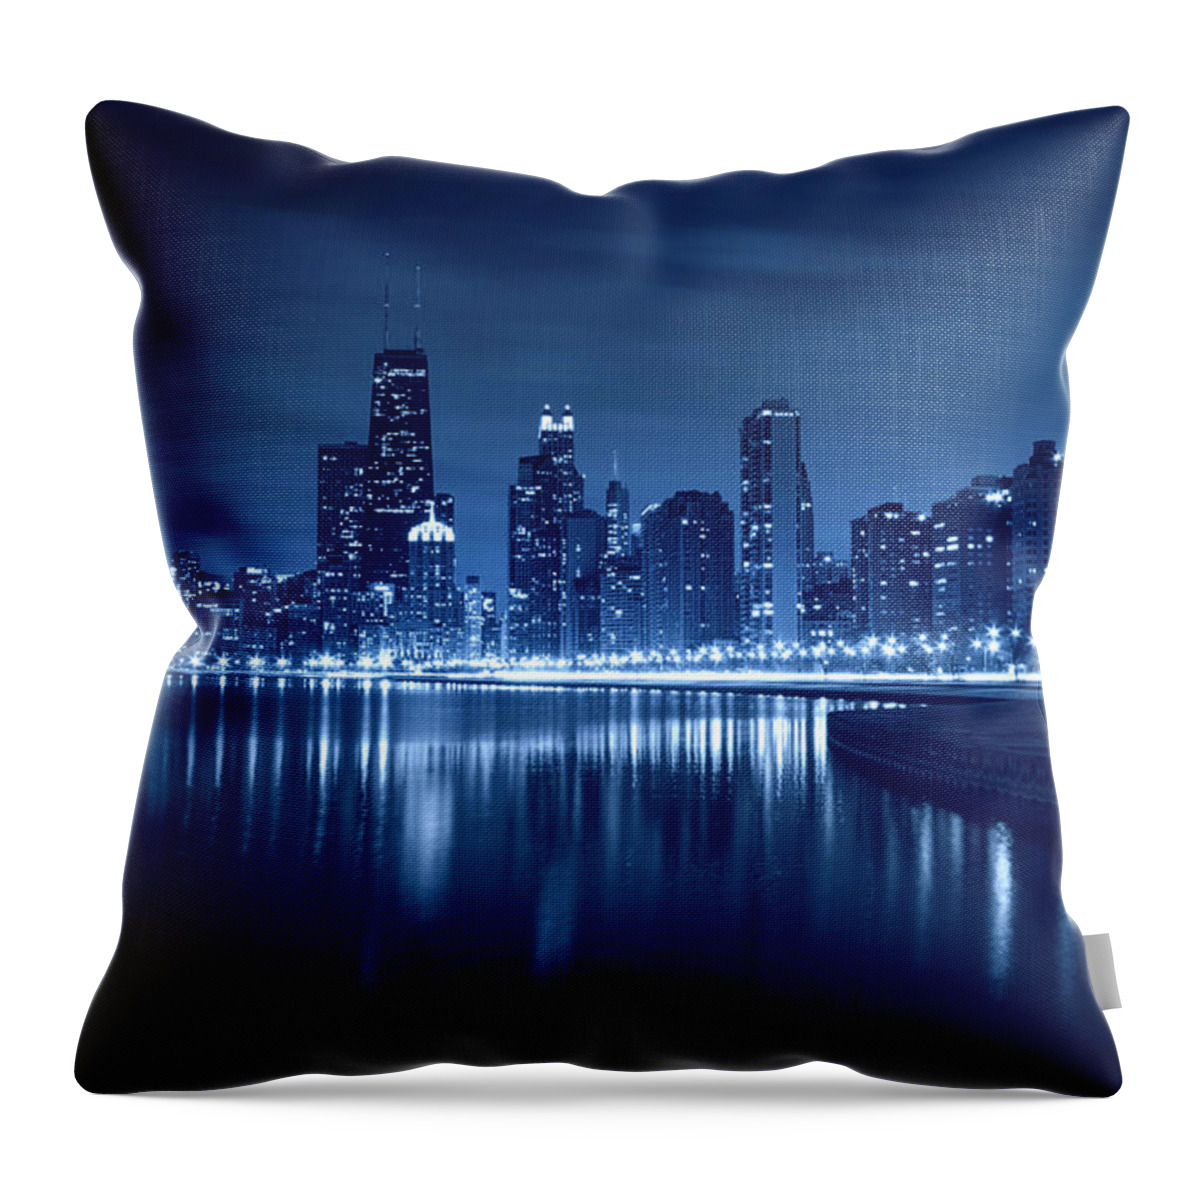 Water's Edge Throw Pillow featuring the photograph Chicago by Wsfurlan